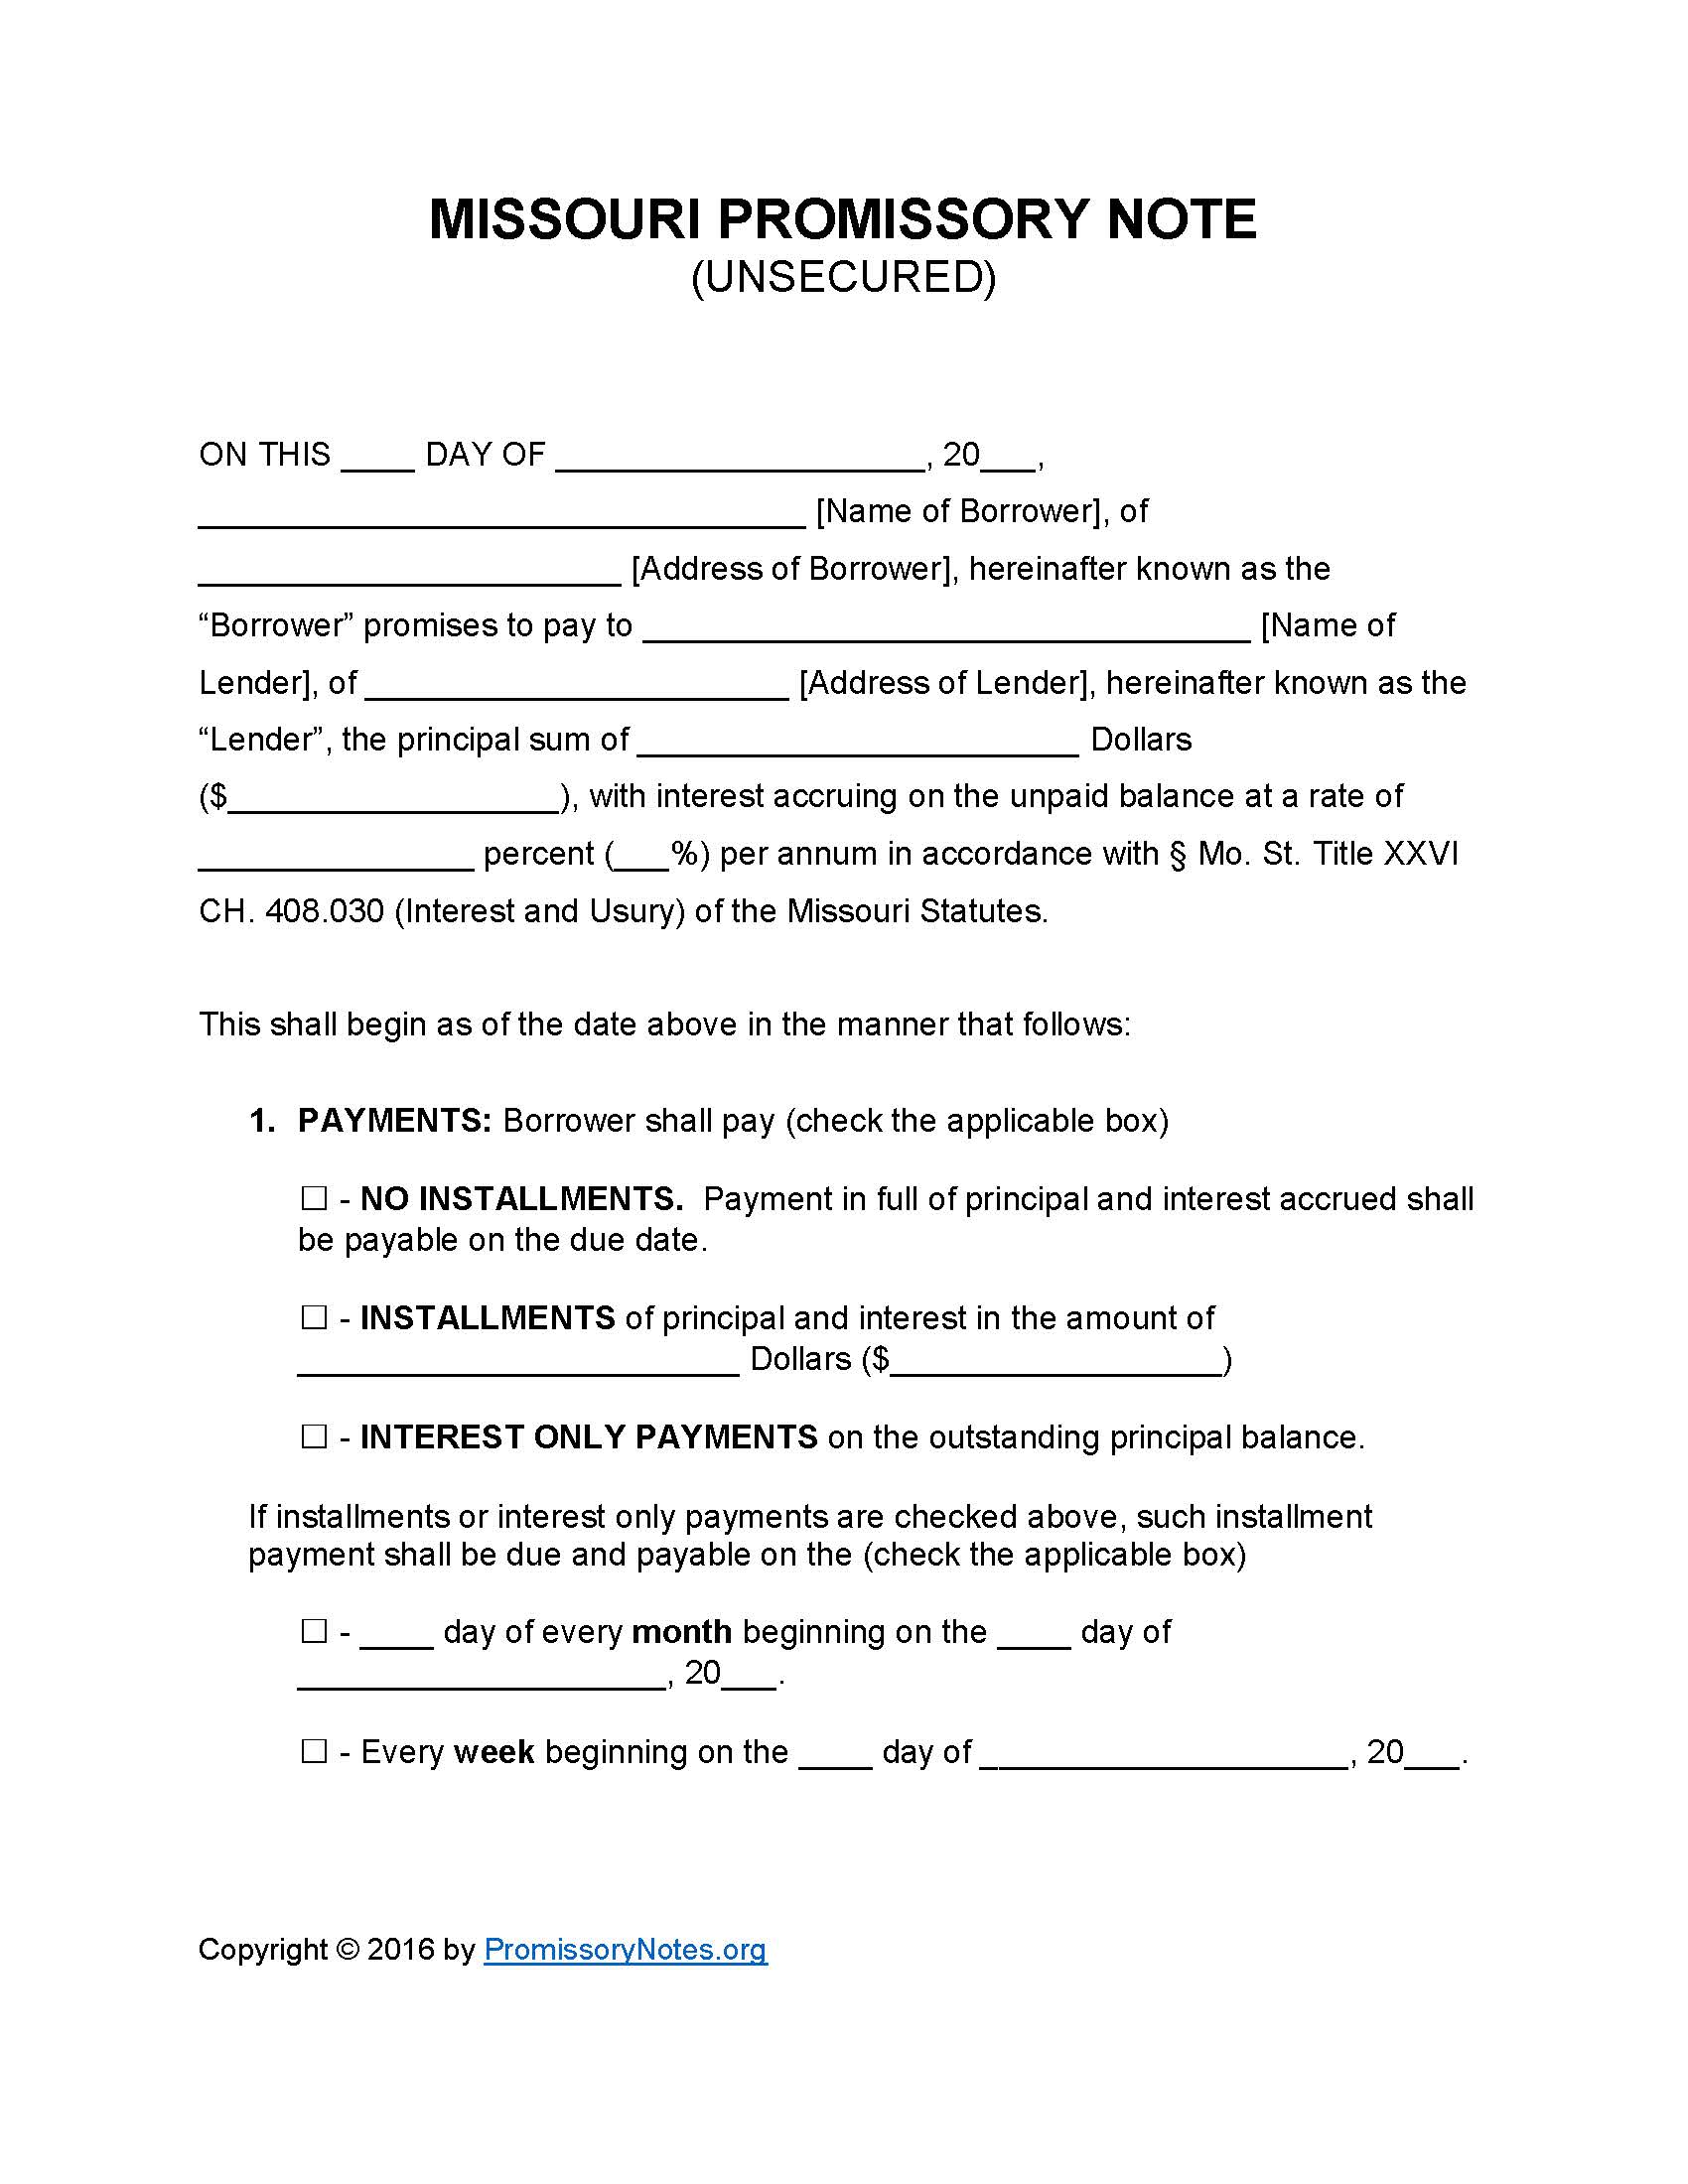 Missouri Unsecured Promissory Note Template Promissory Notes